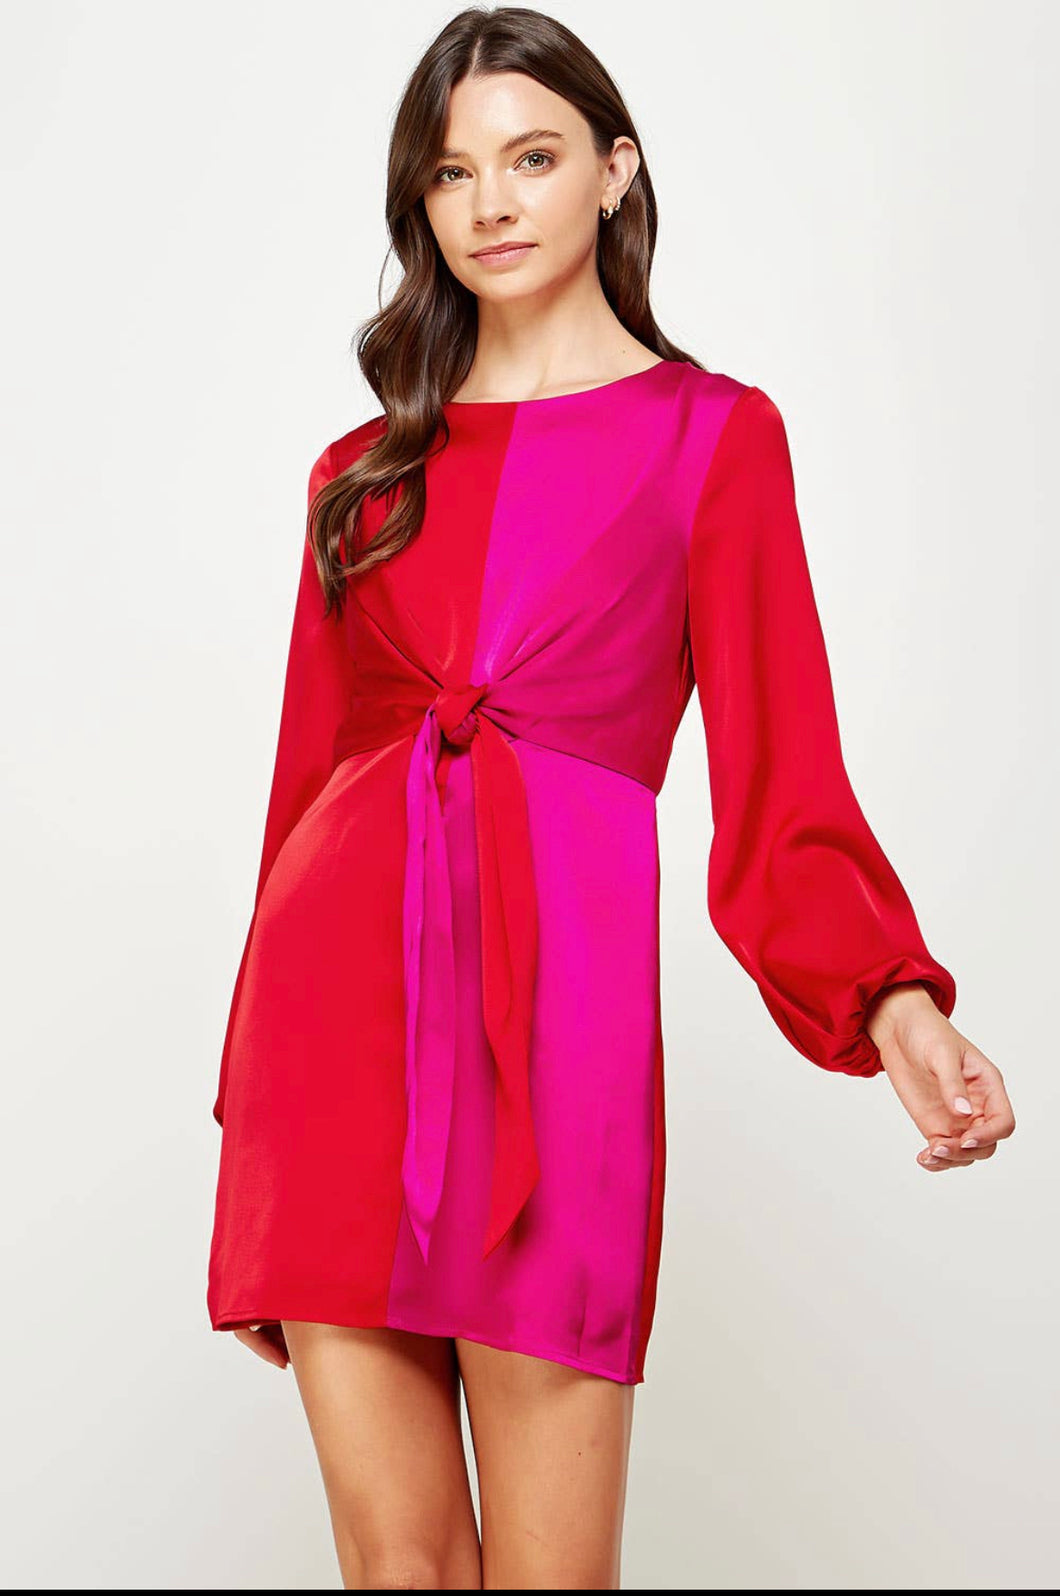 Red and Fuchsia Color Block Tie Satin Dress